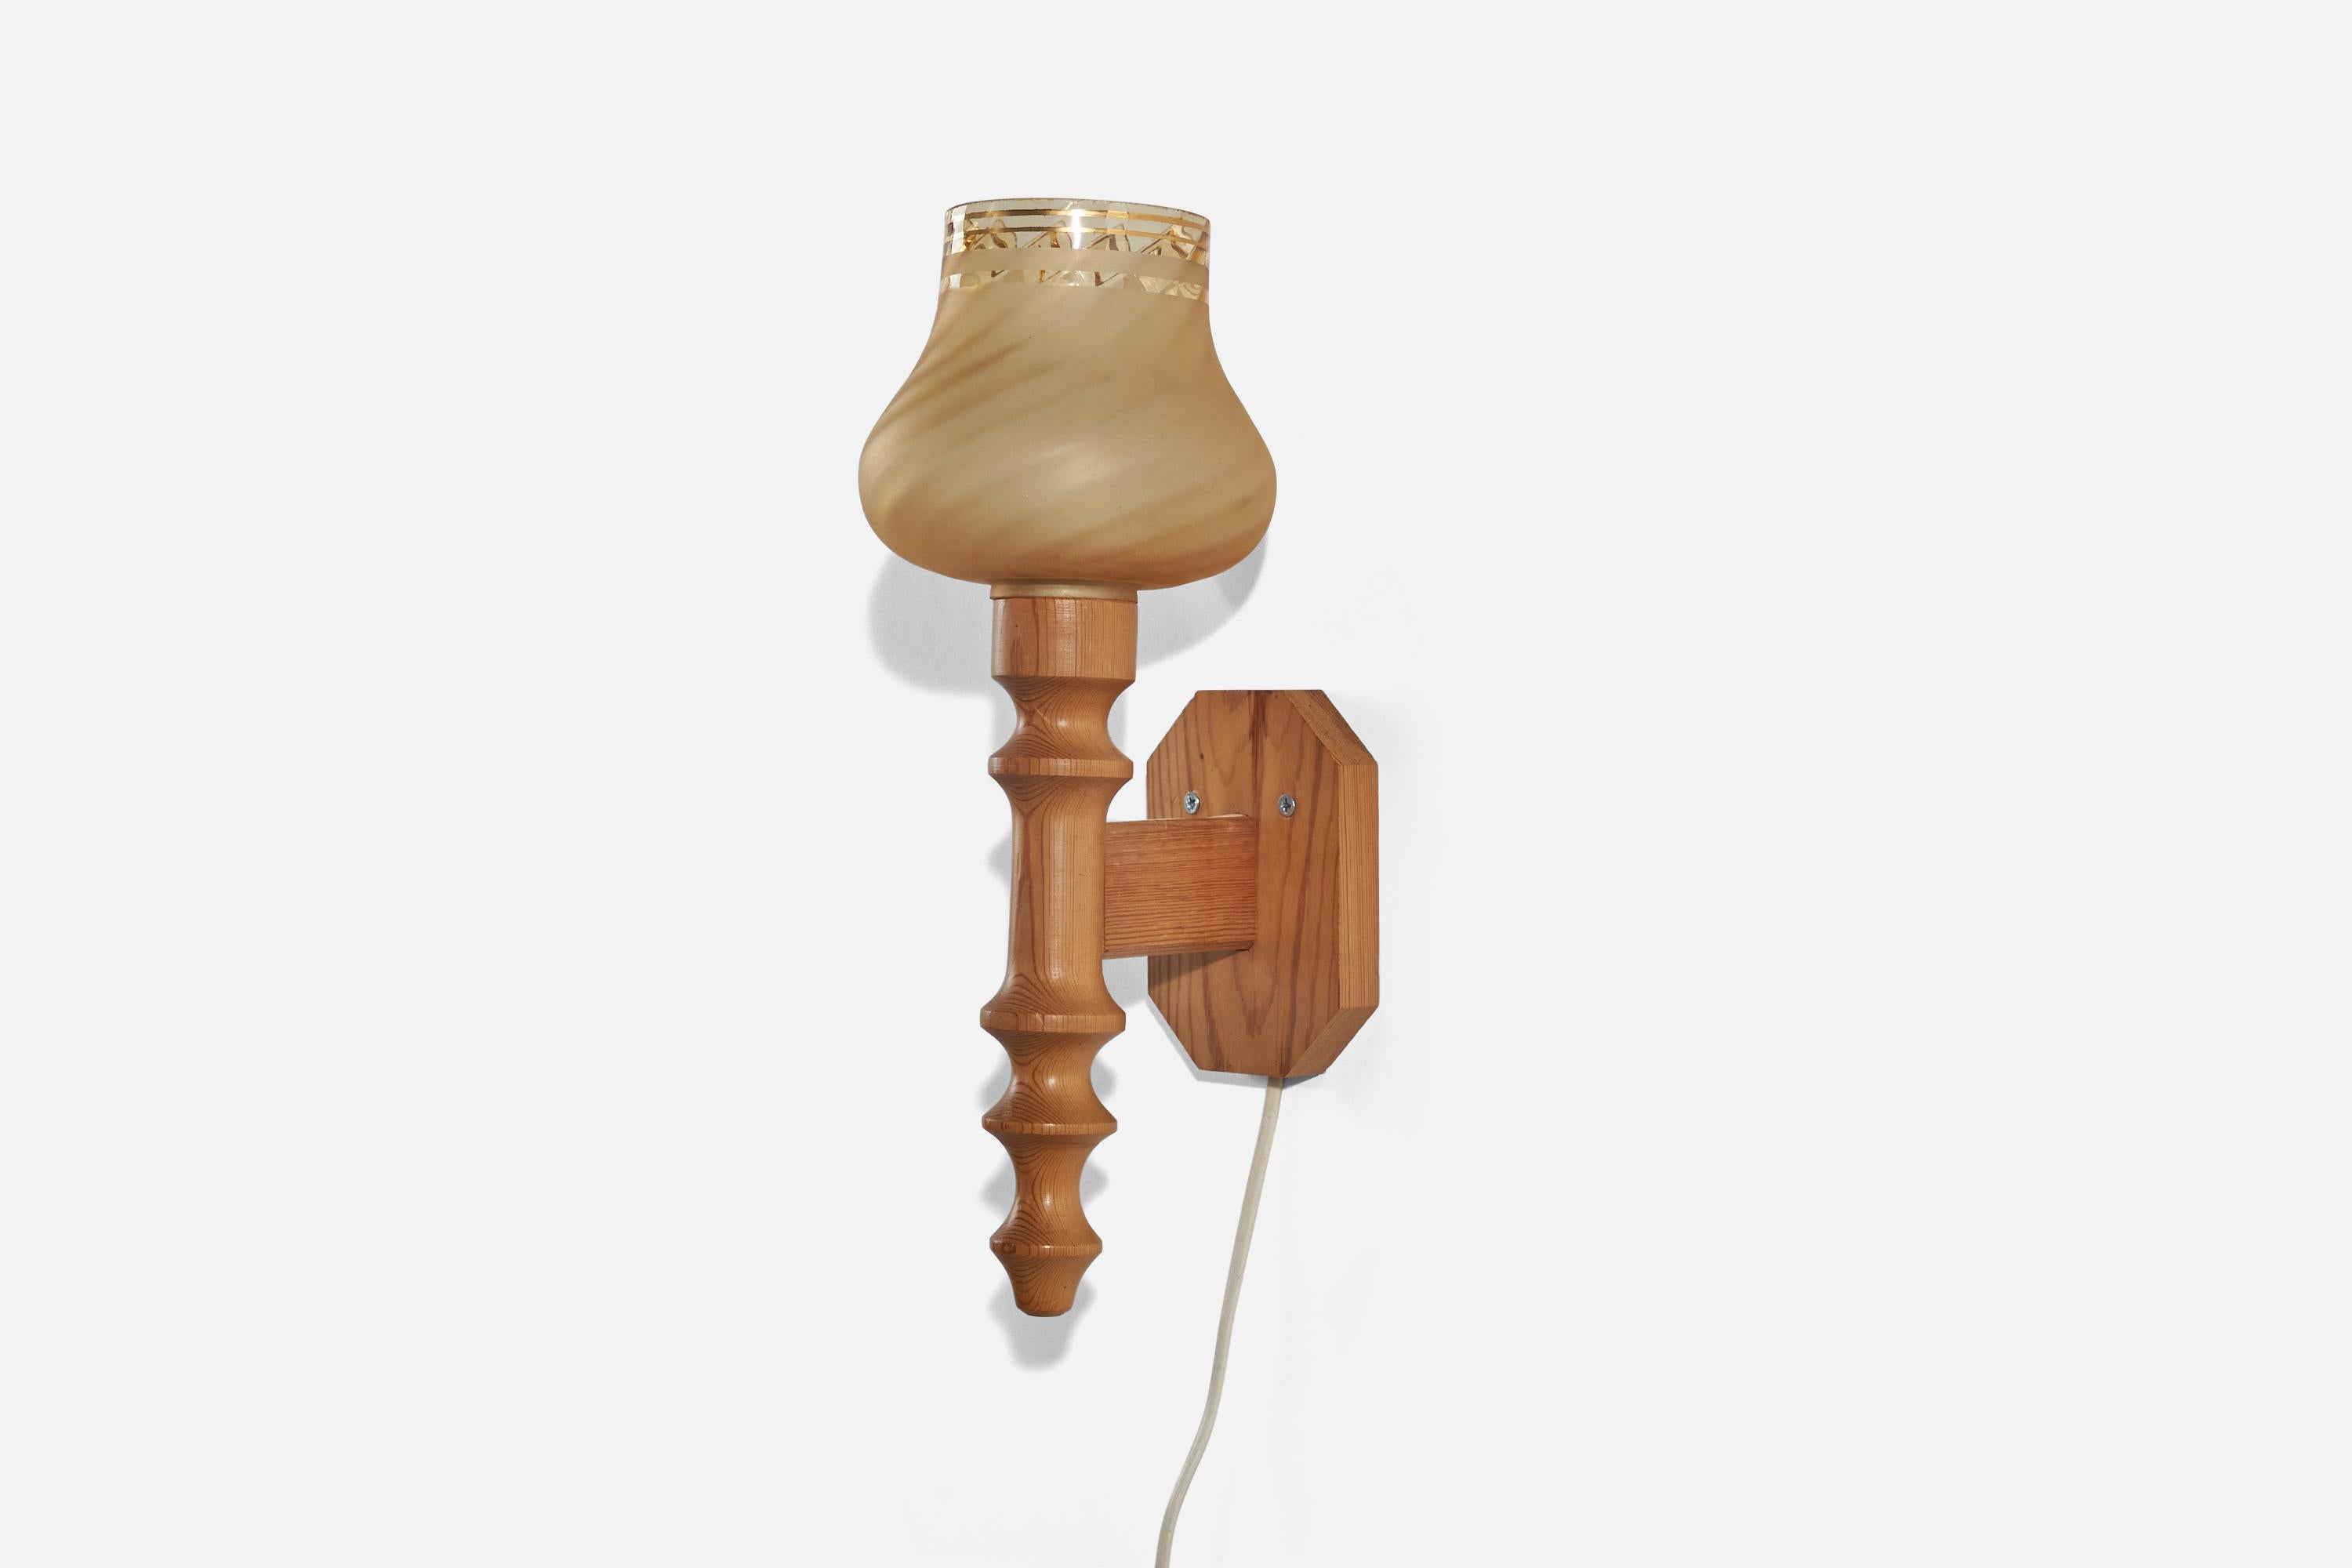 A pine and glass sconce designed and produced in Sweden, c. 1970s. 

Fixture is not hardwired, plug in only. 
Socket takes standard E-26 medium base bulb.
There is no maximum wattage stated on the fixture.